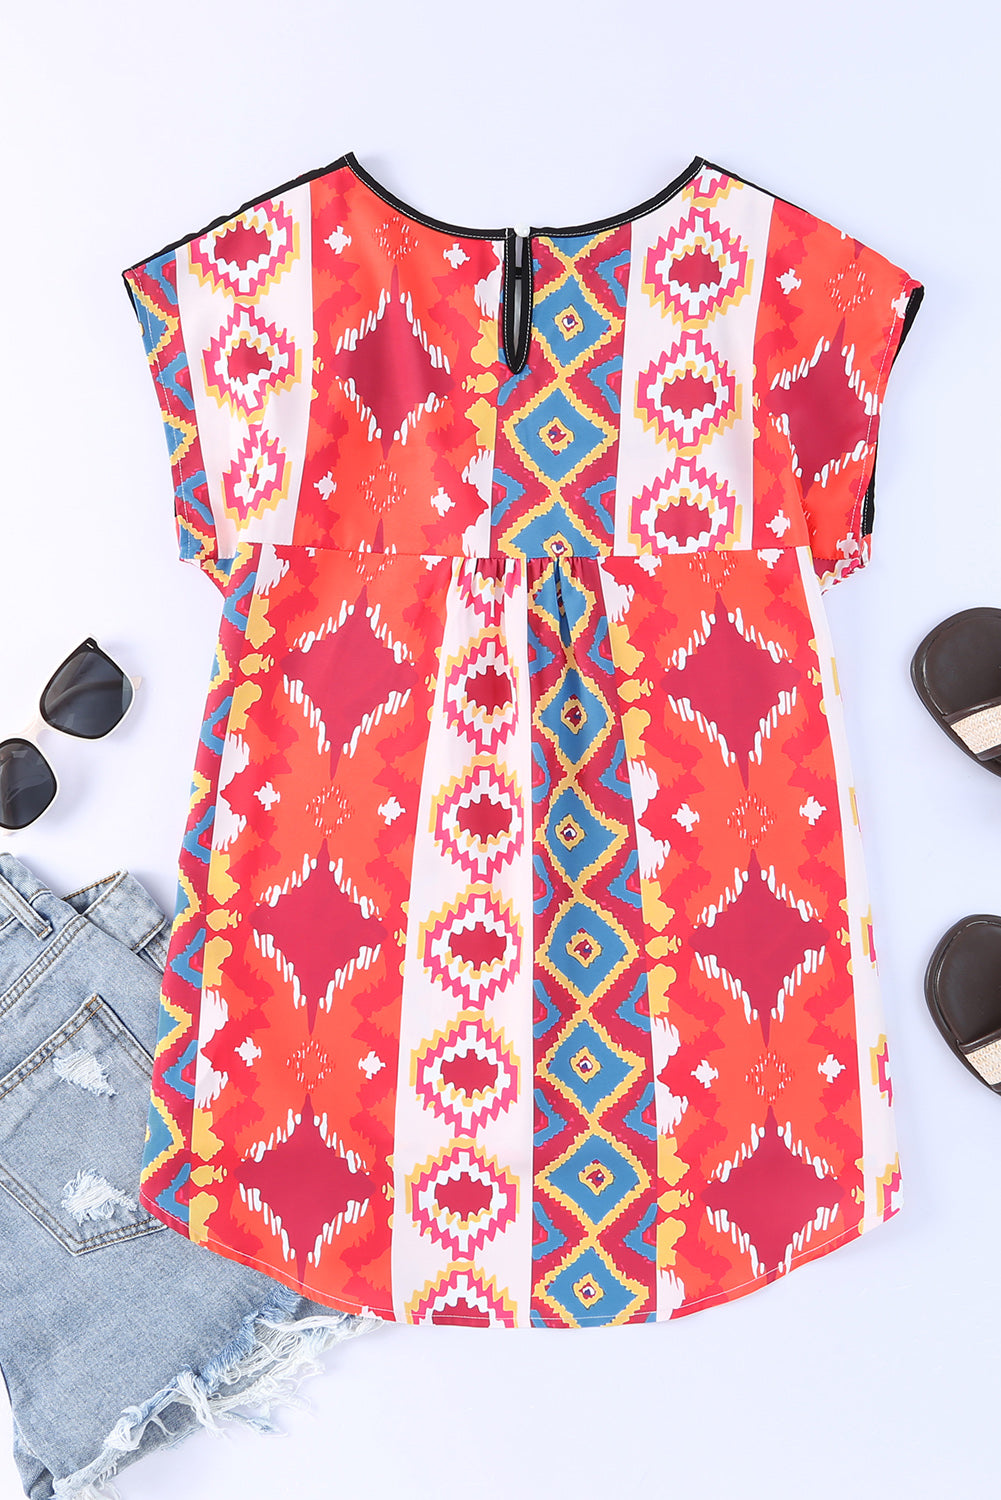 Embroidered Round Neck Aztec and Floral Top